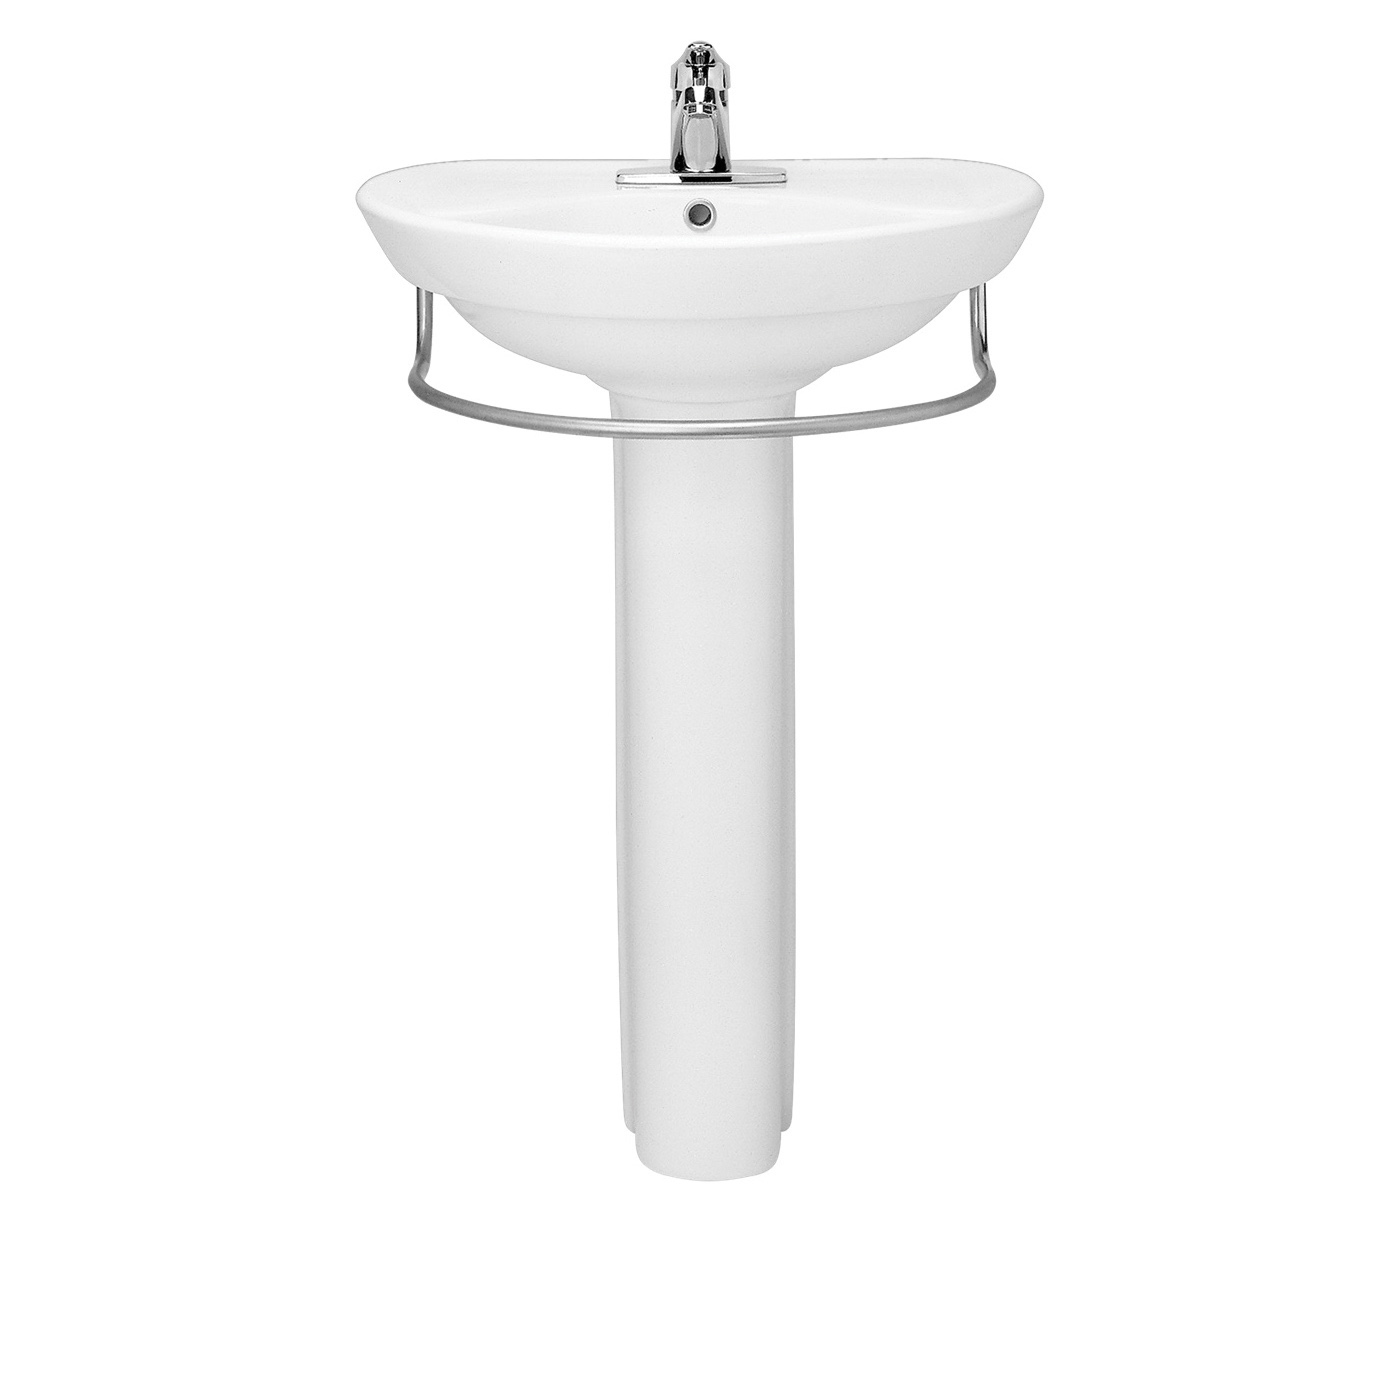 American Standard 0268.100.020 Ravenna™ Bathroom Sink With Rear Overflow, Round, 24-1/2 in W x 20 in D x 34 in H, Pedestal Mount, Vitreous China, White, Import